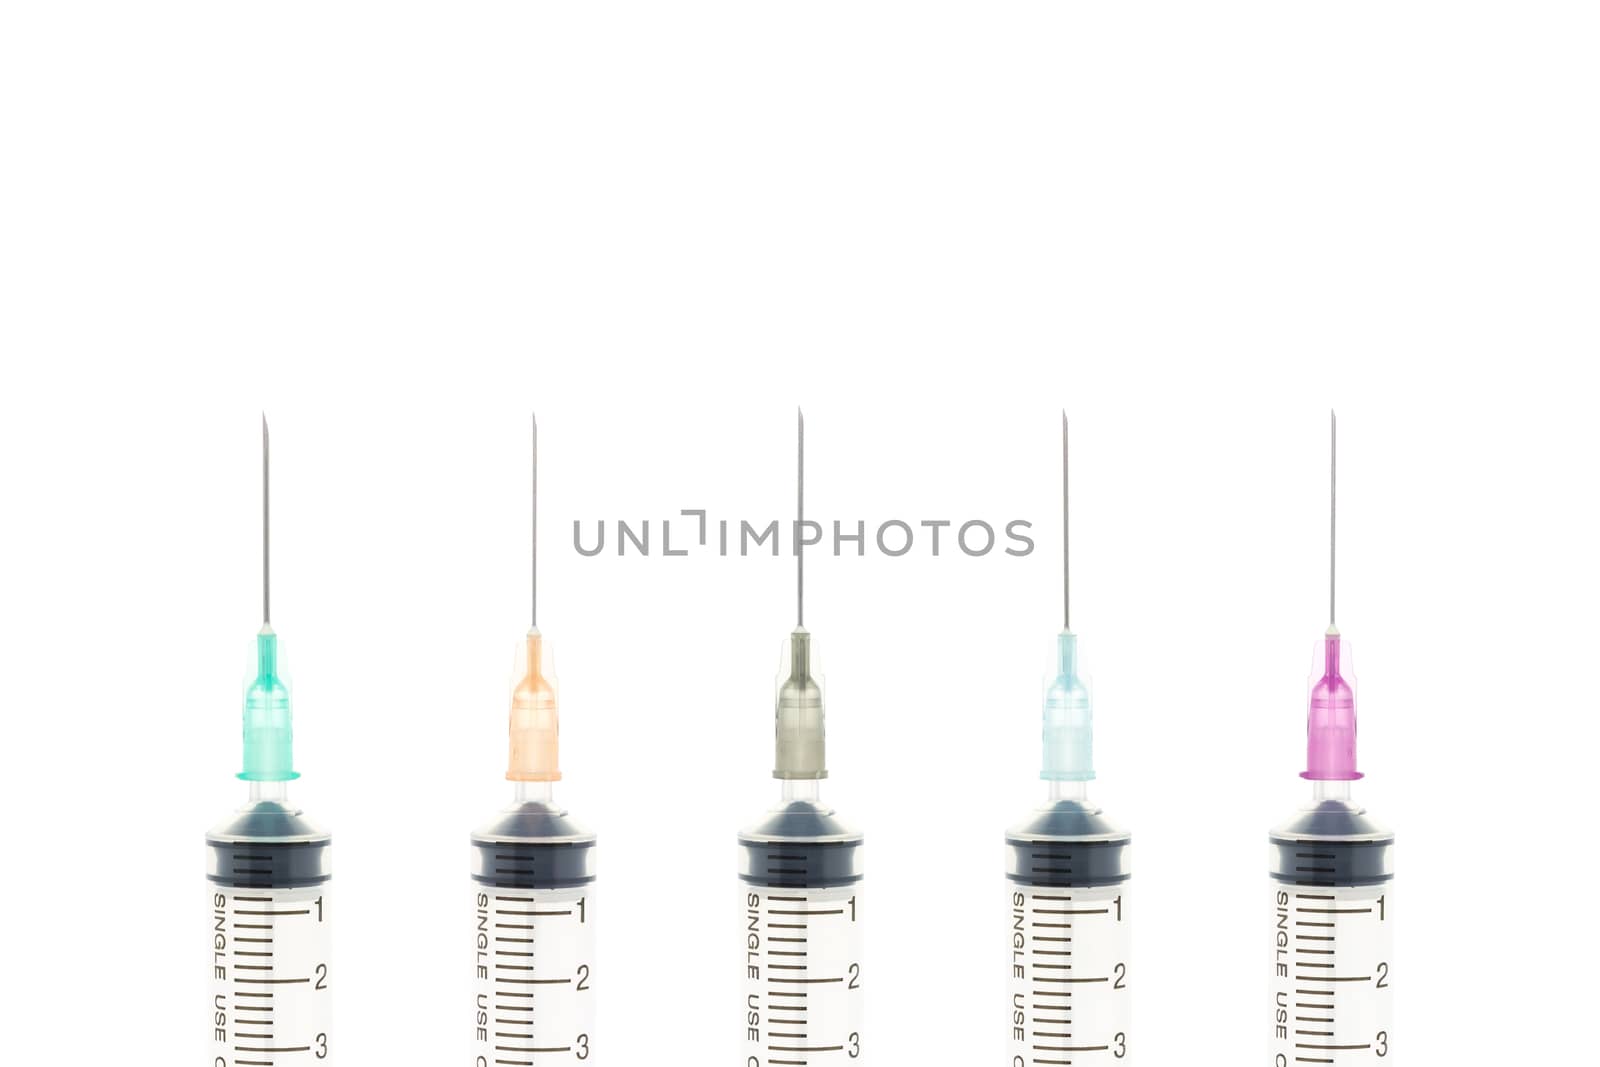 Five color needle or medical device isolated on white background. Medical background for hospital or clinic or health design.